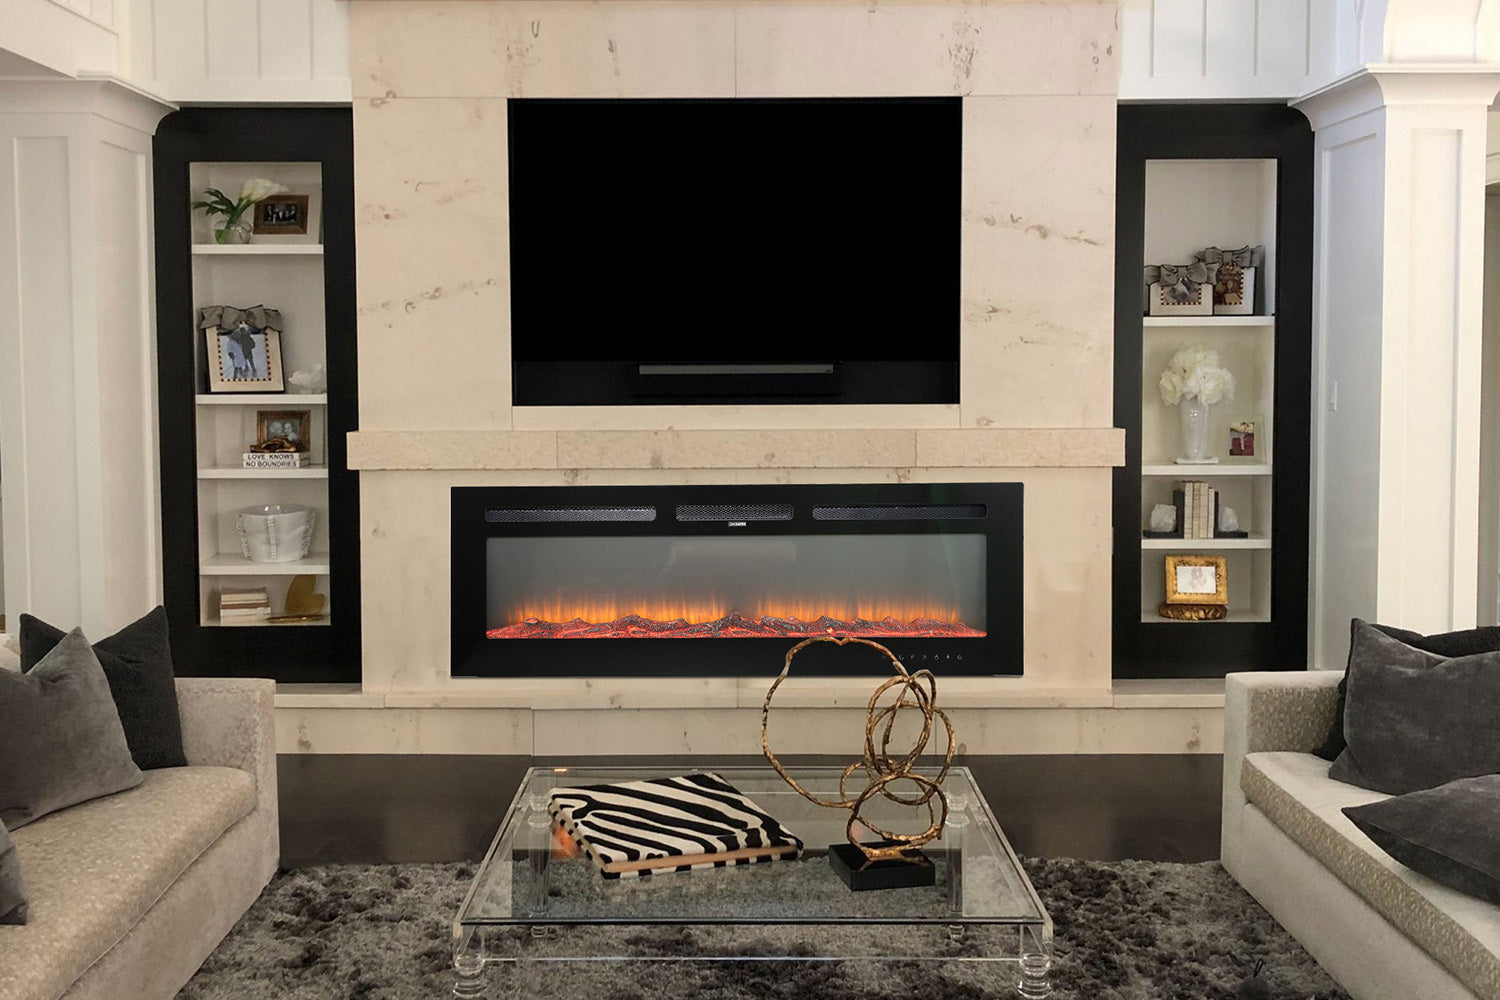 Top 3 Best Selling Electric Fireplaces at boyelliving.com